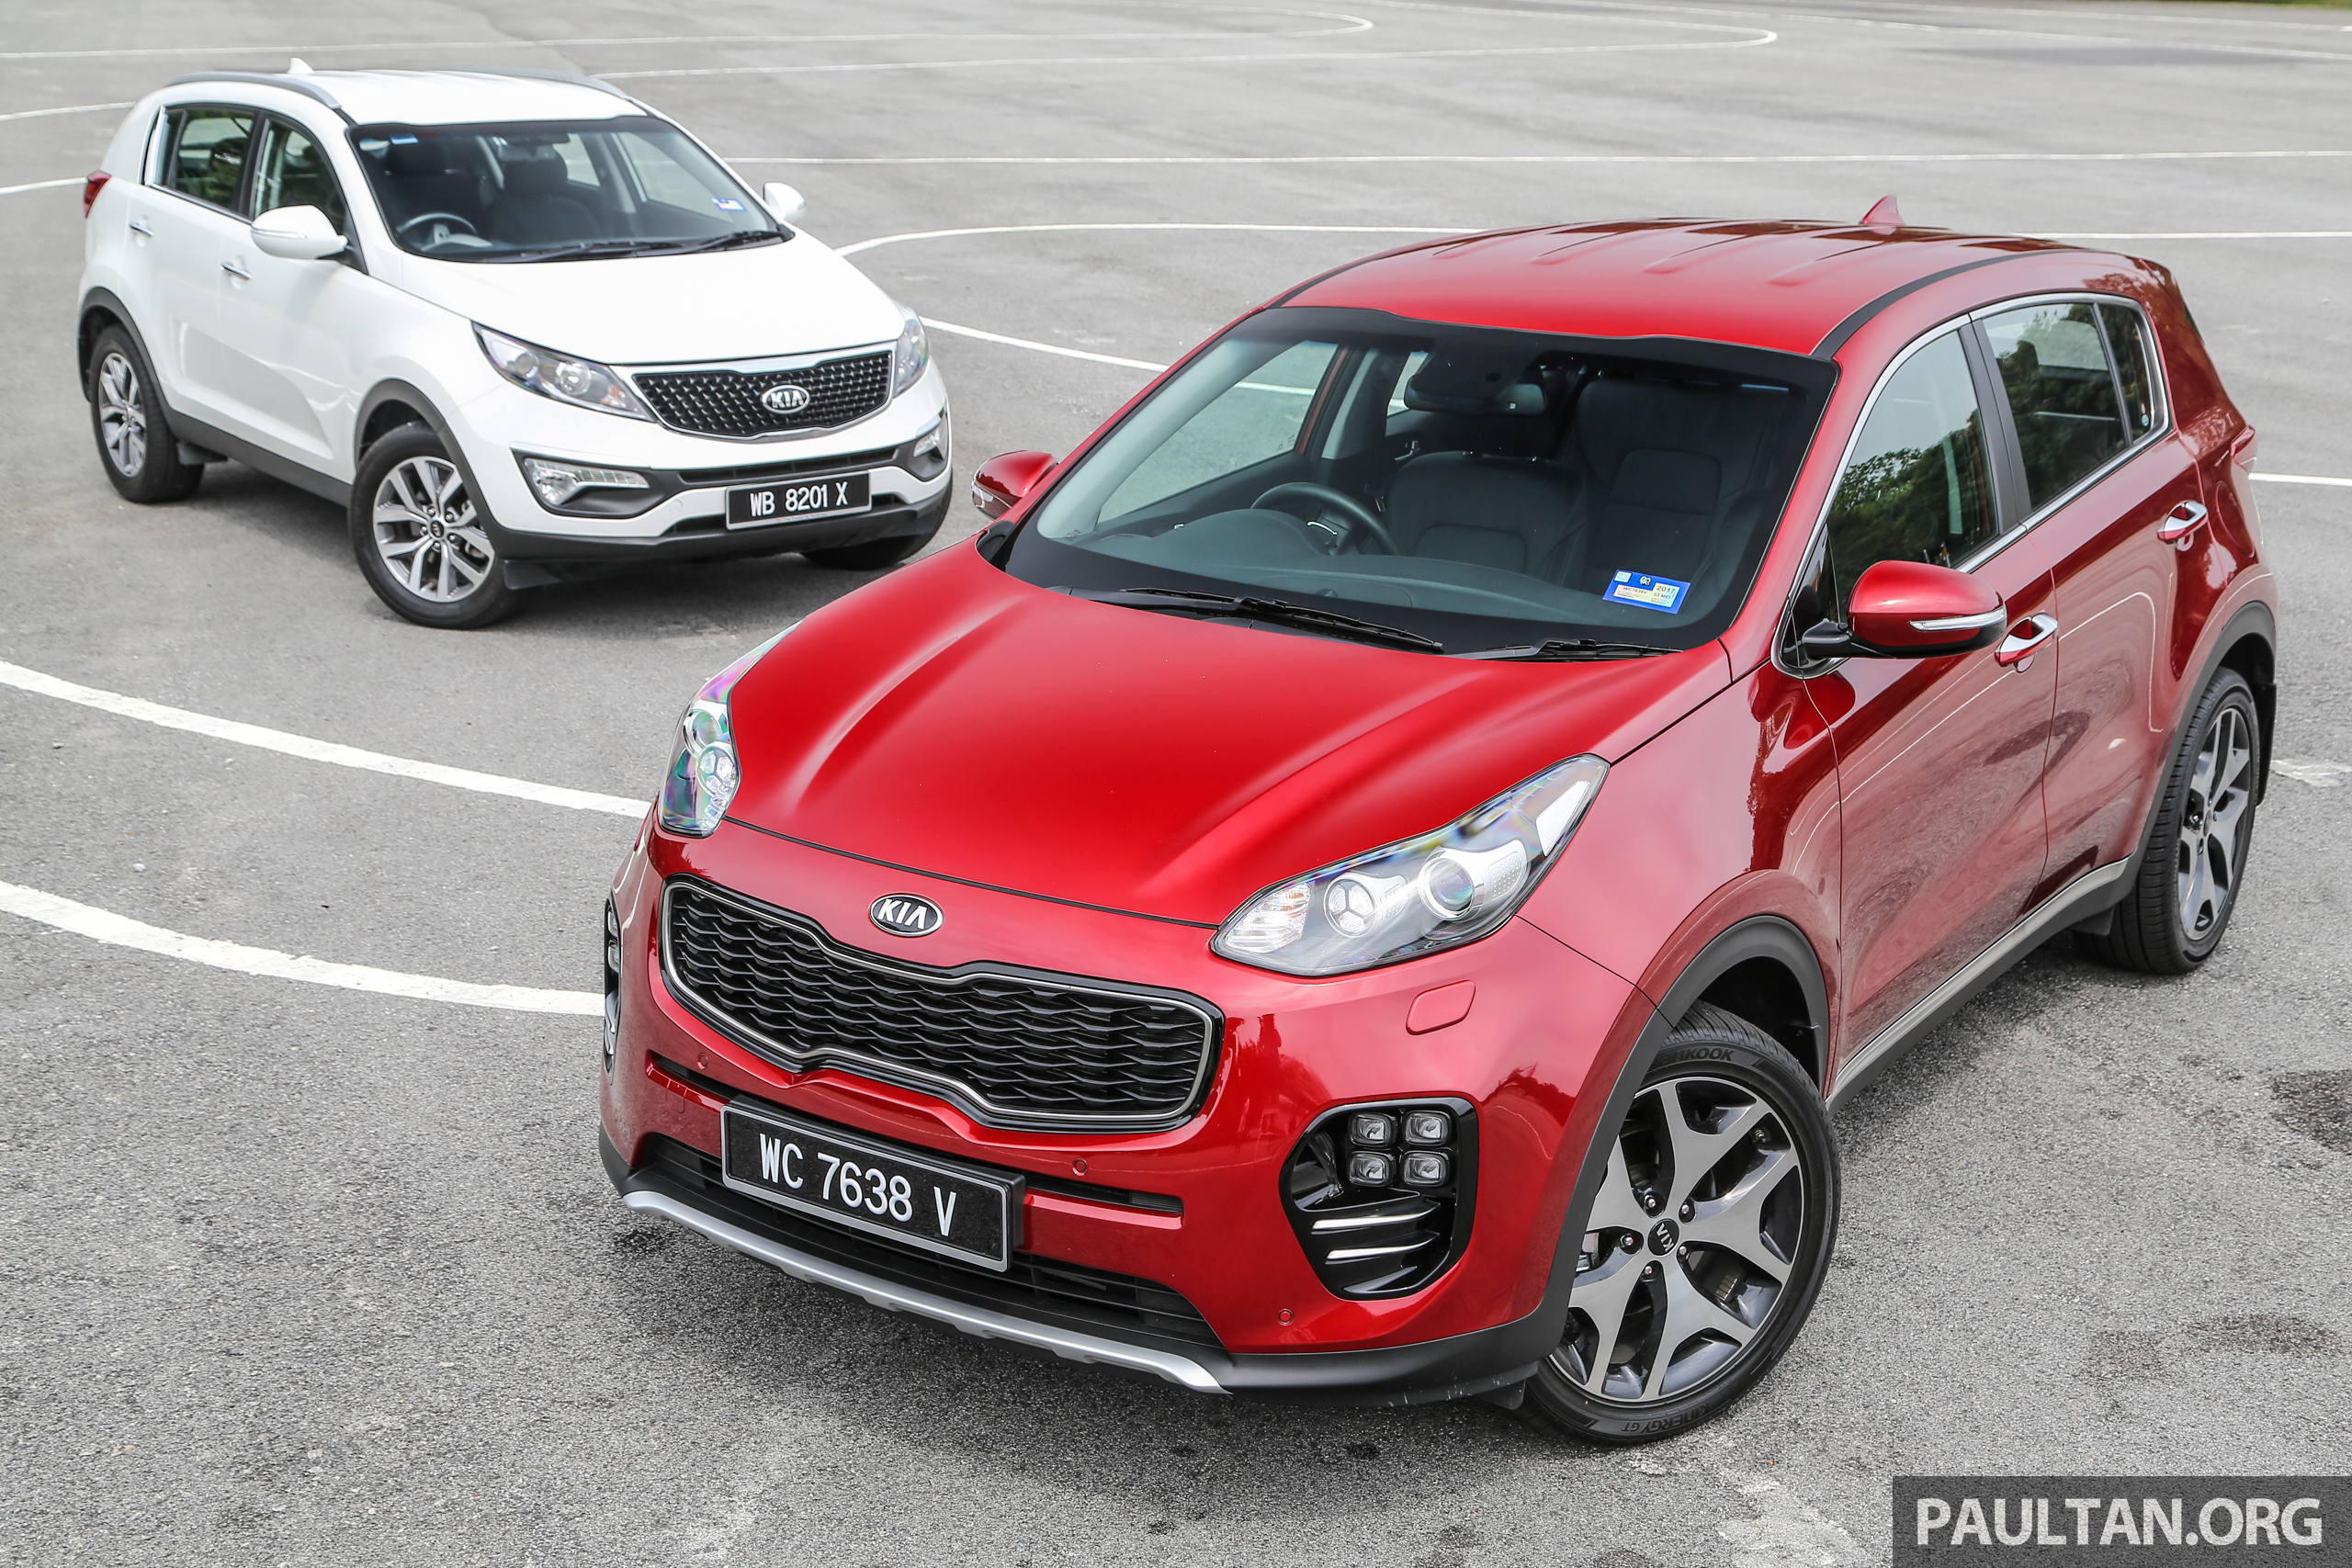 GALLERY: Kia Sportage - new QL together with old SL 